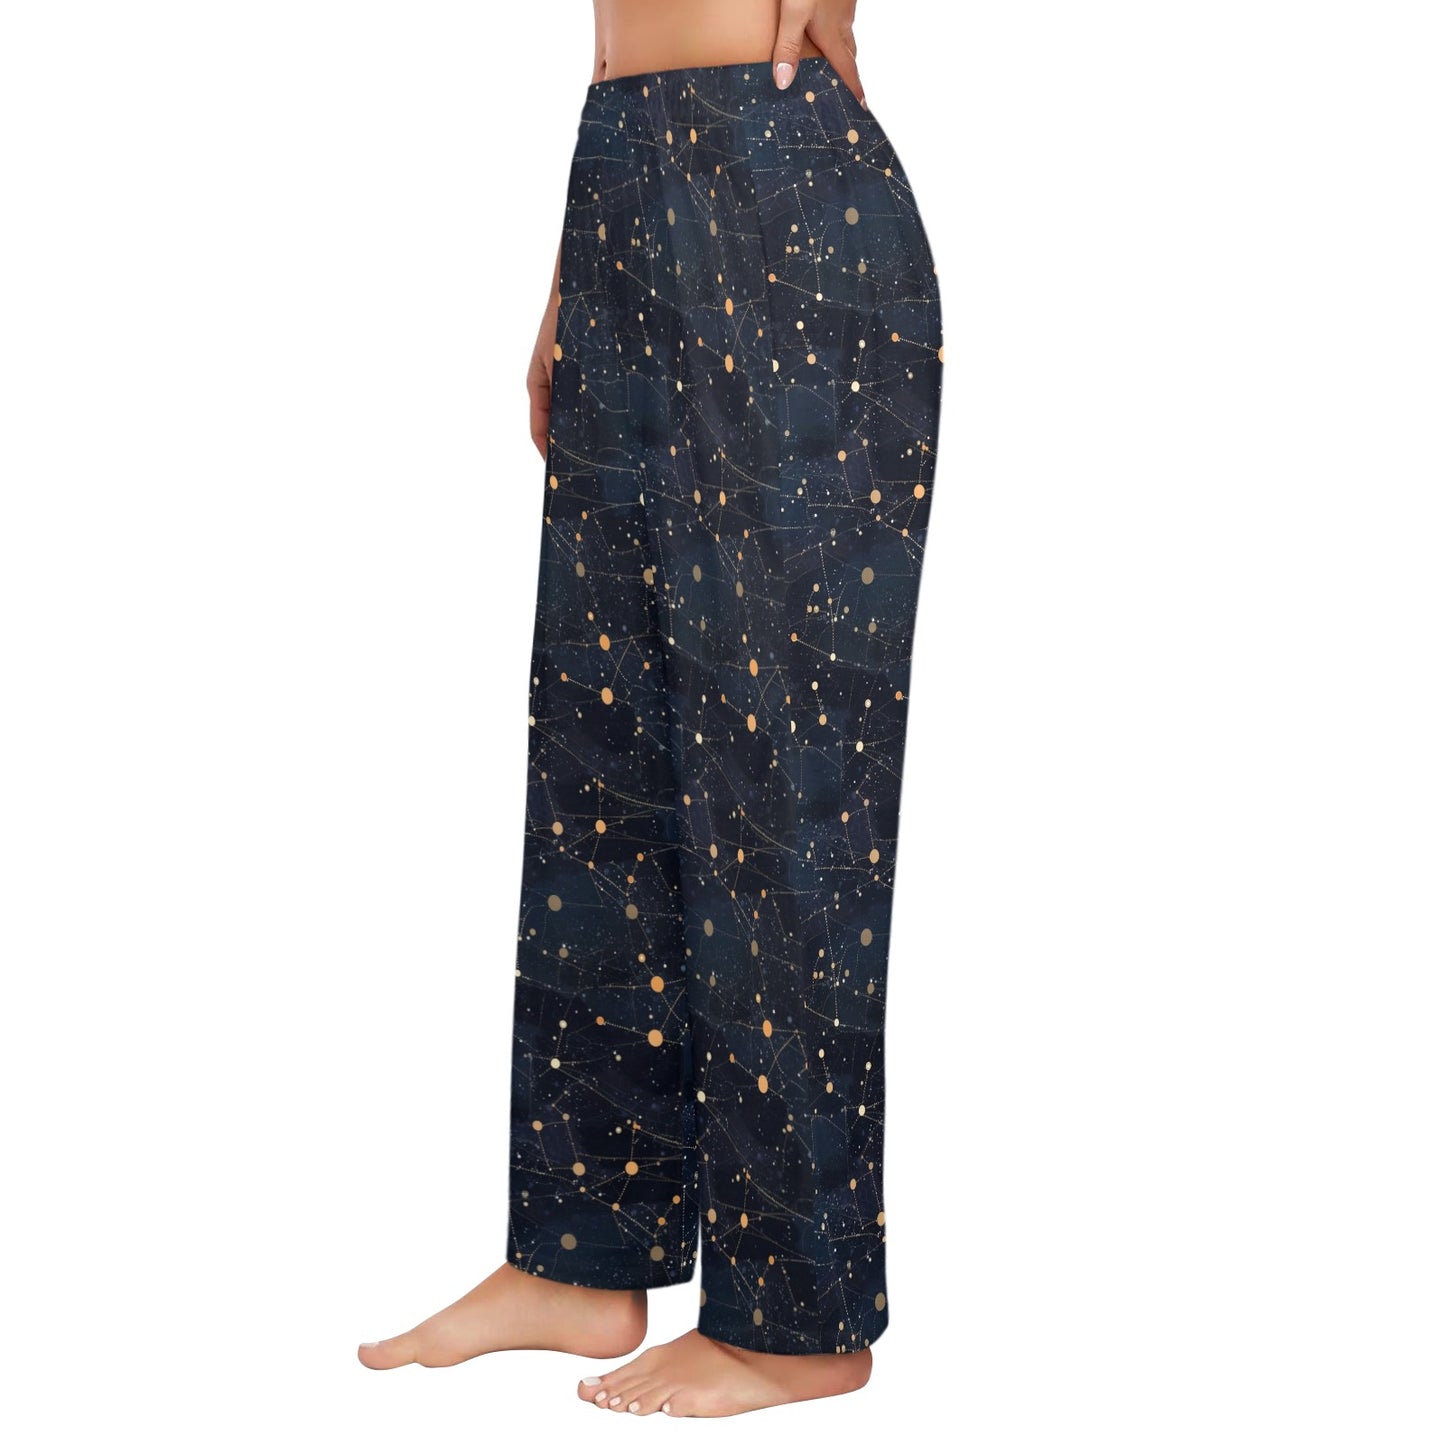 Constellation Women Pajamas Pants, Universe Space Galaxy Satin PJ Funny Pockets Trousers Couples Matching Ladies Trousers Bottoms